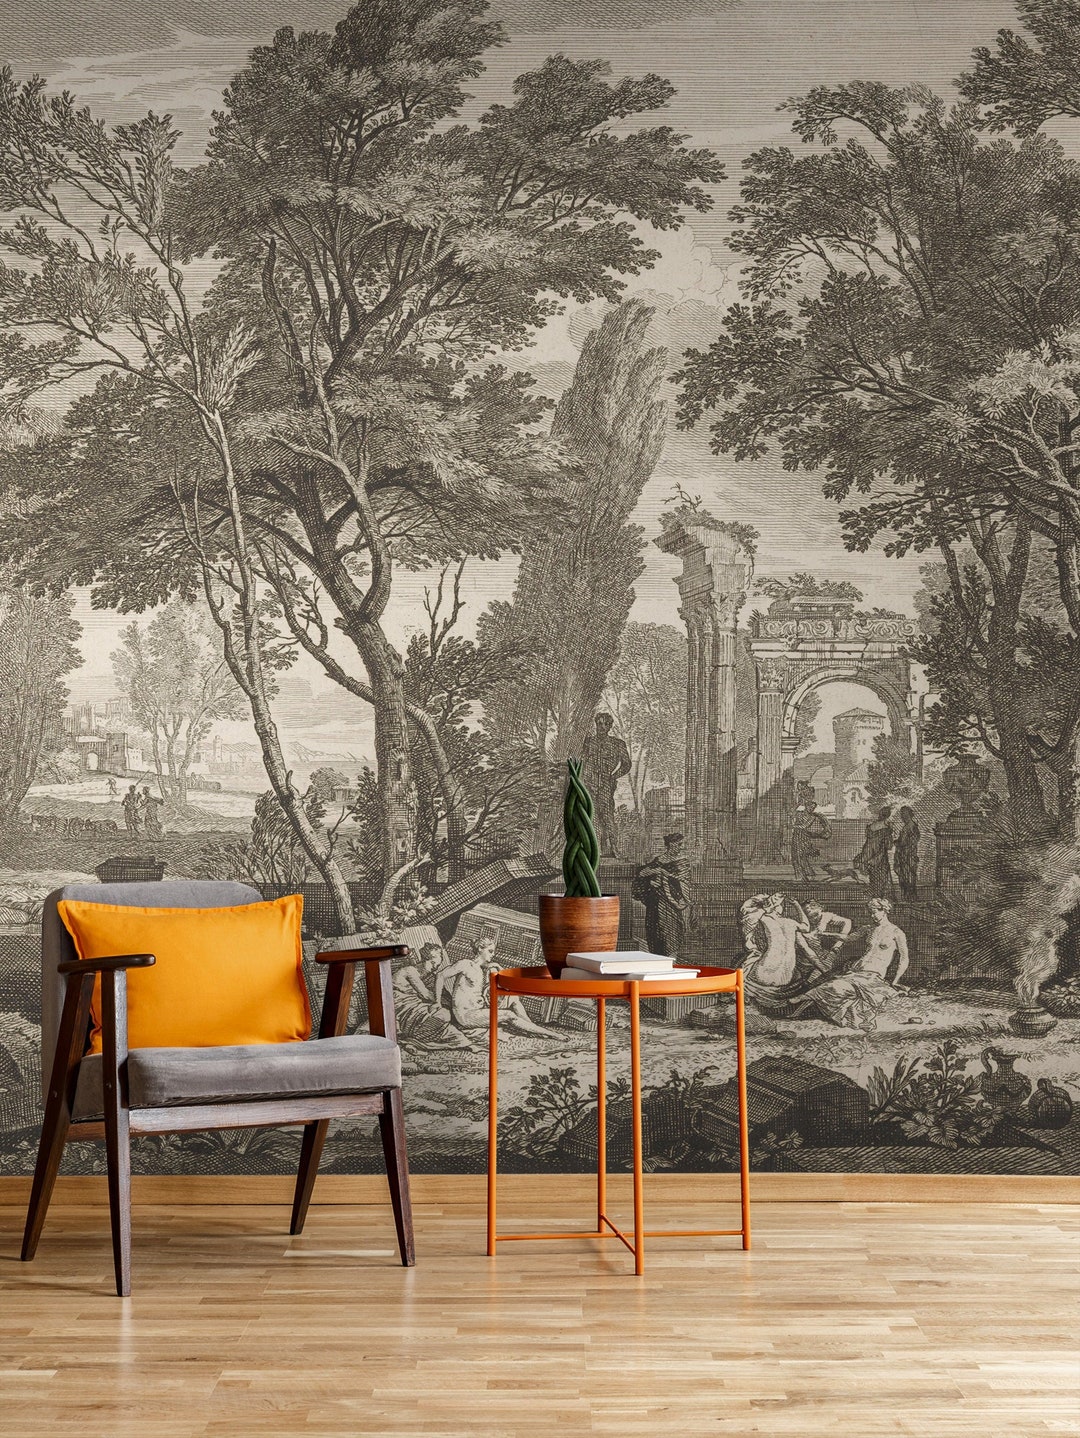 Vintage Landscape Wall Mural Peel and Stick Wall Mural